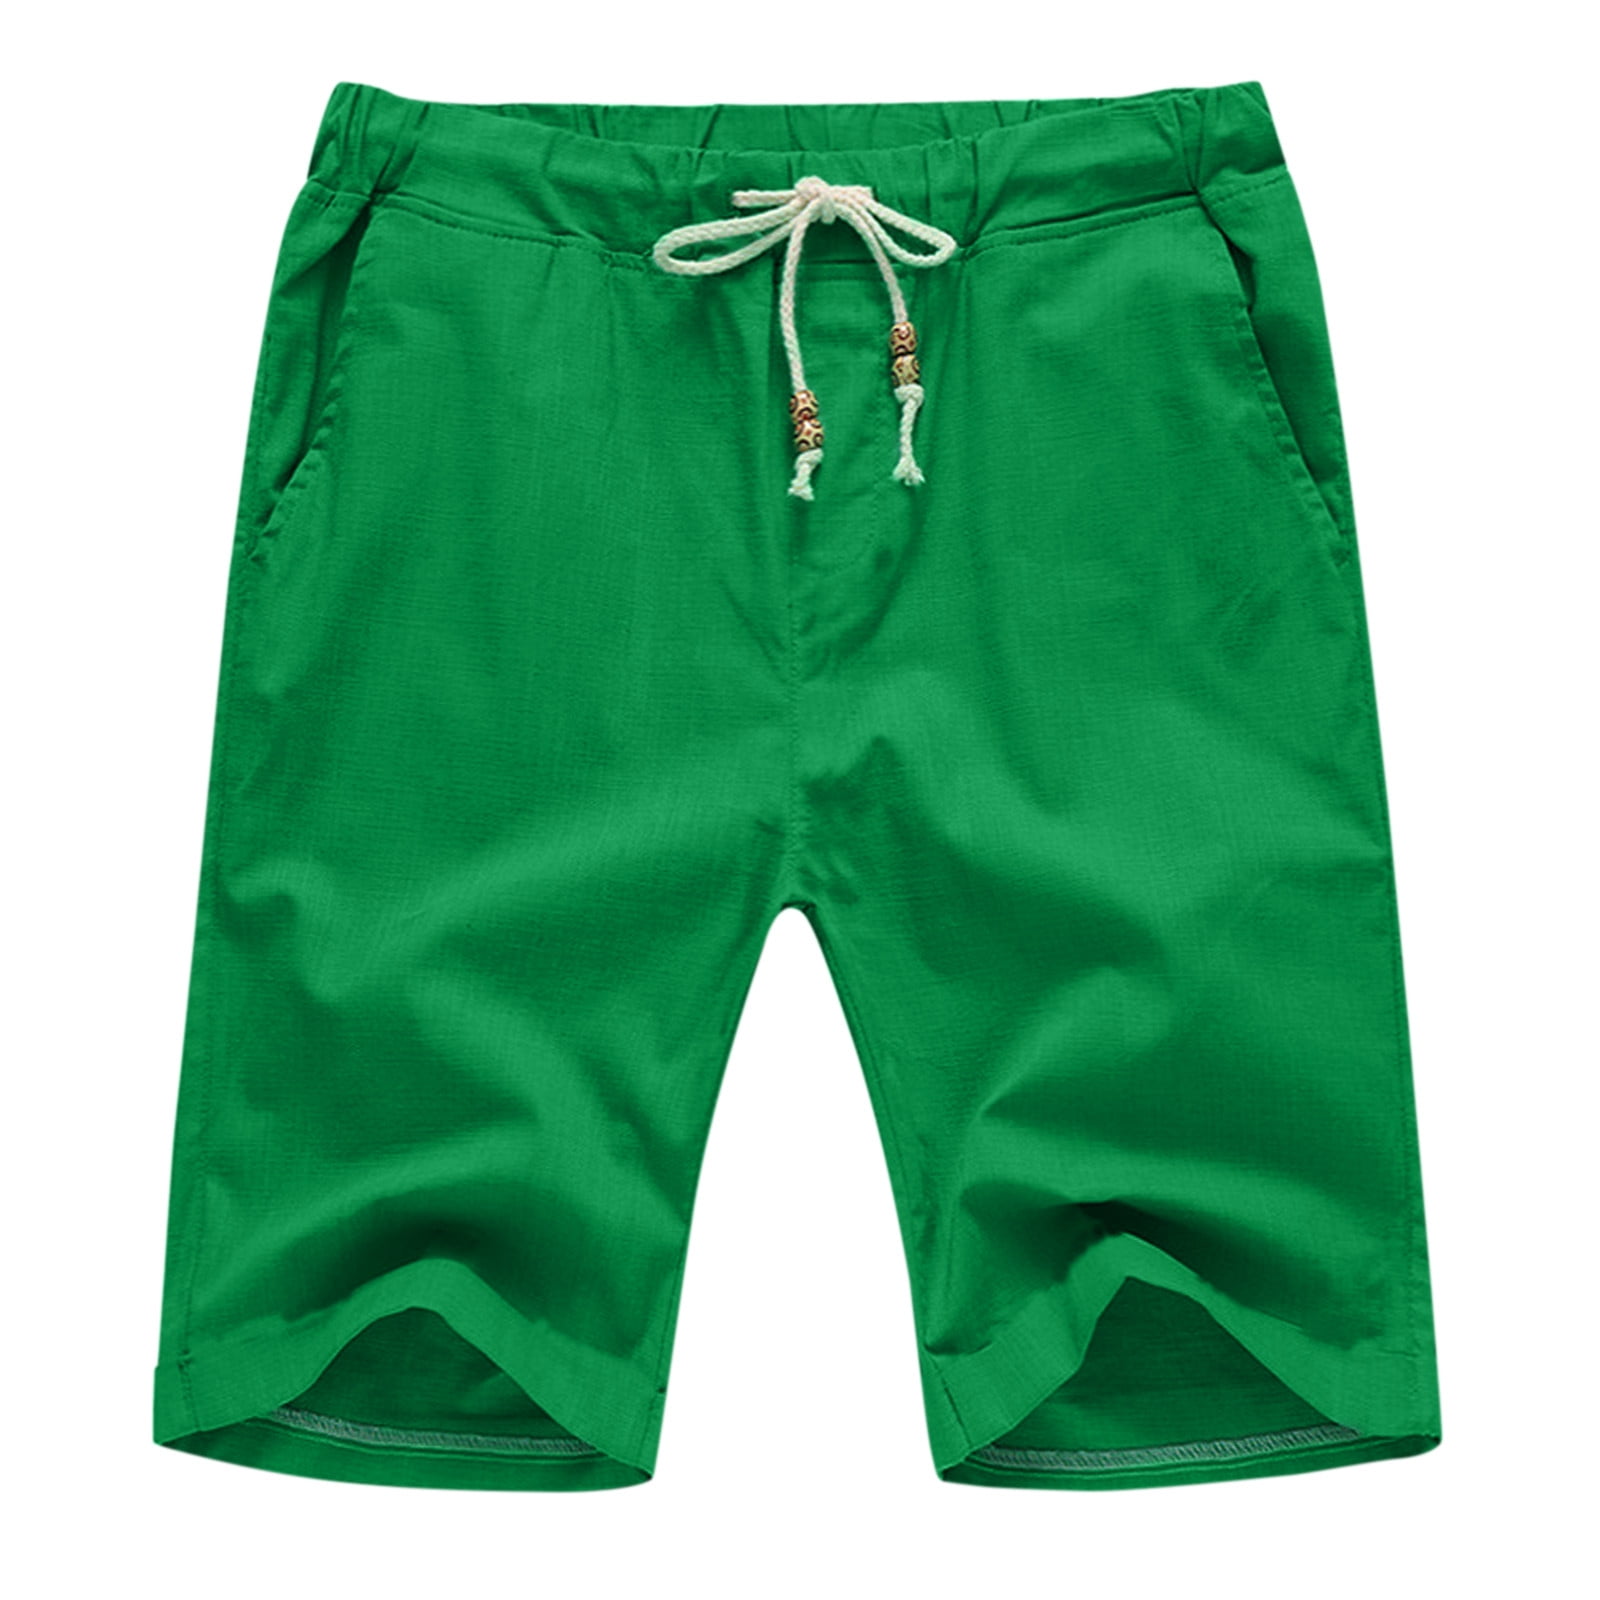 Navy Plus Size Shorts Male Summer Casual Solid Short Pant Bead